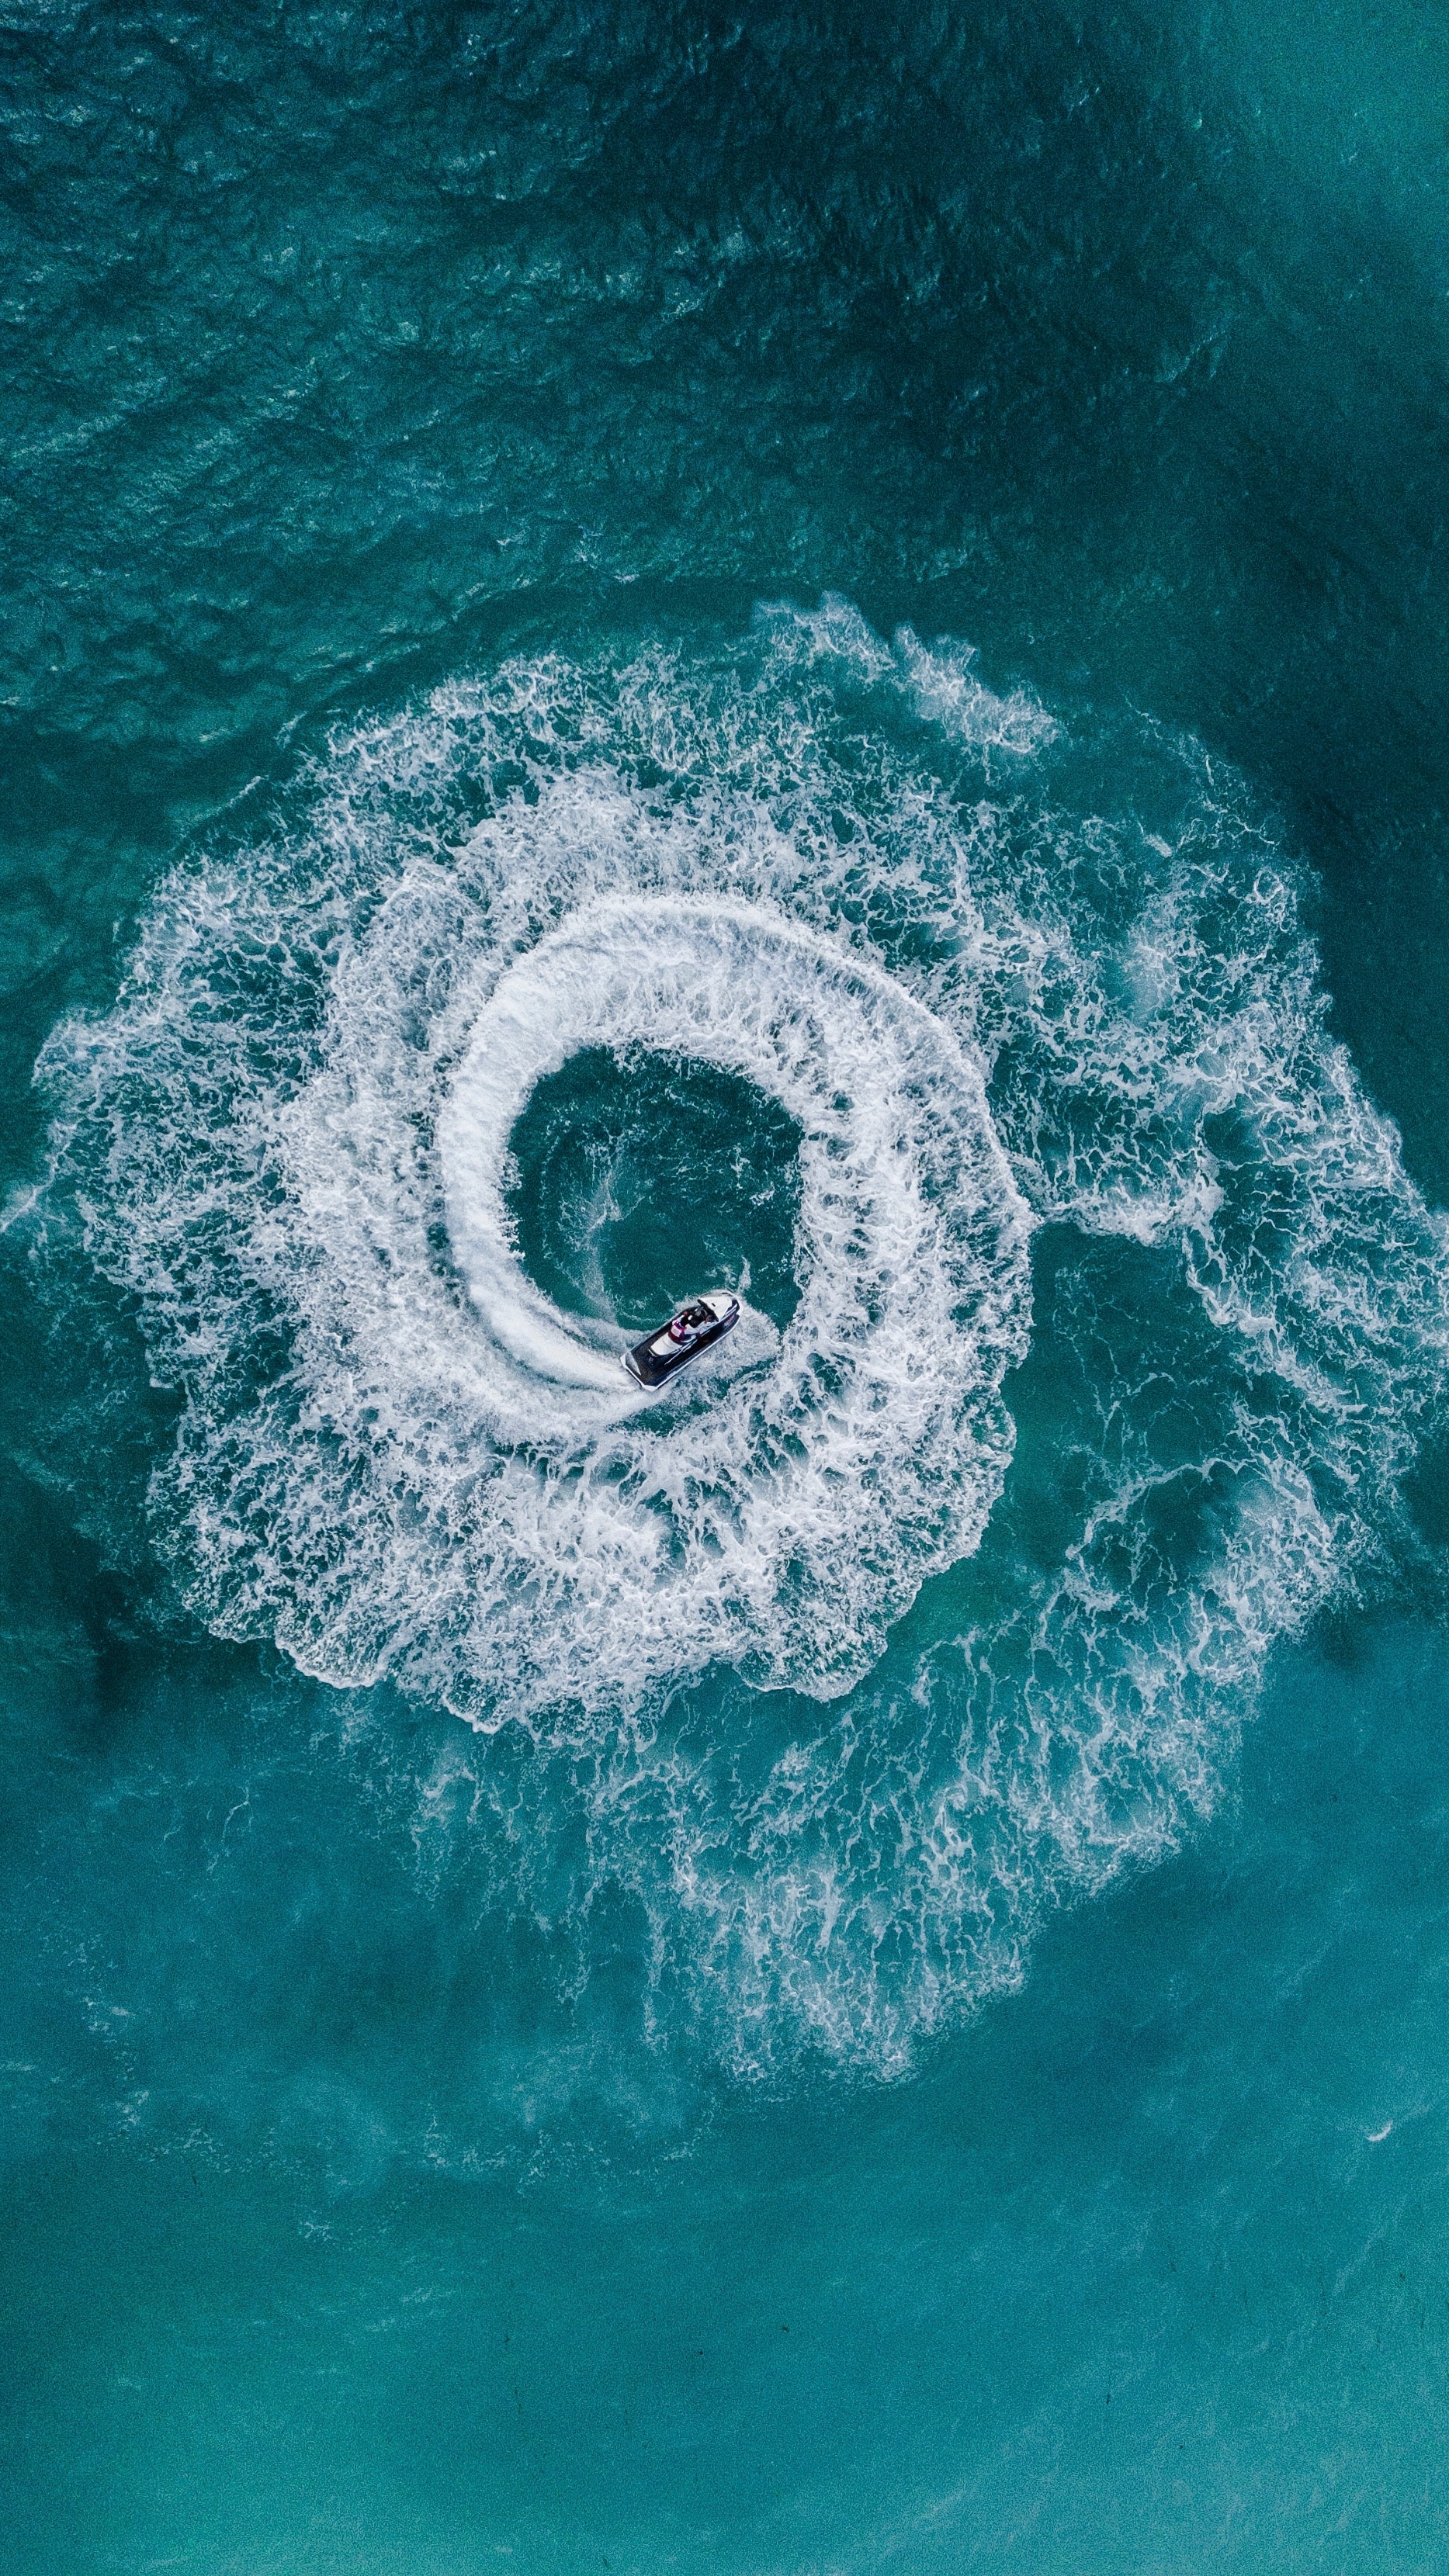 miscellaneous, water, sea, waves, view from above, miscellanea, jet ski, hydrocycle